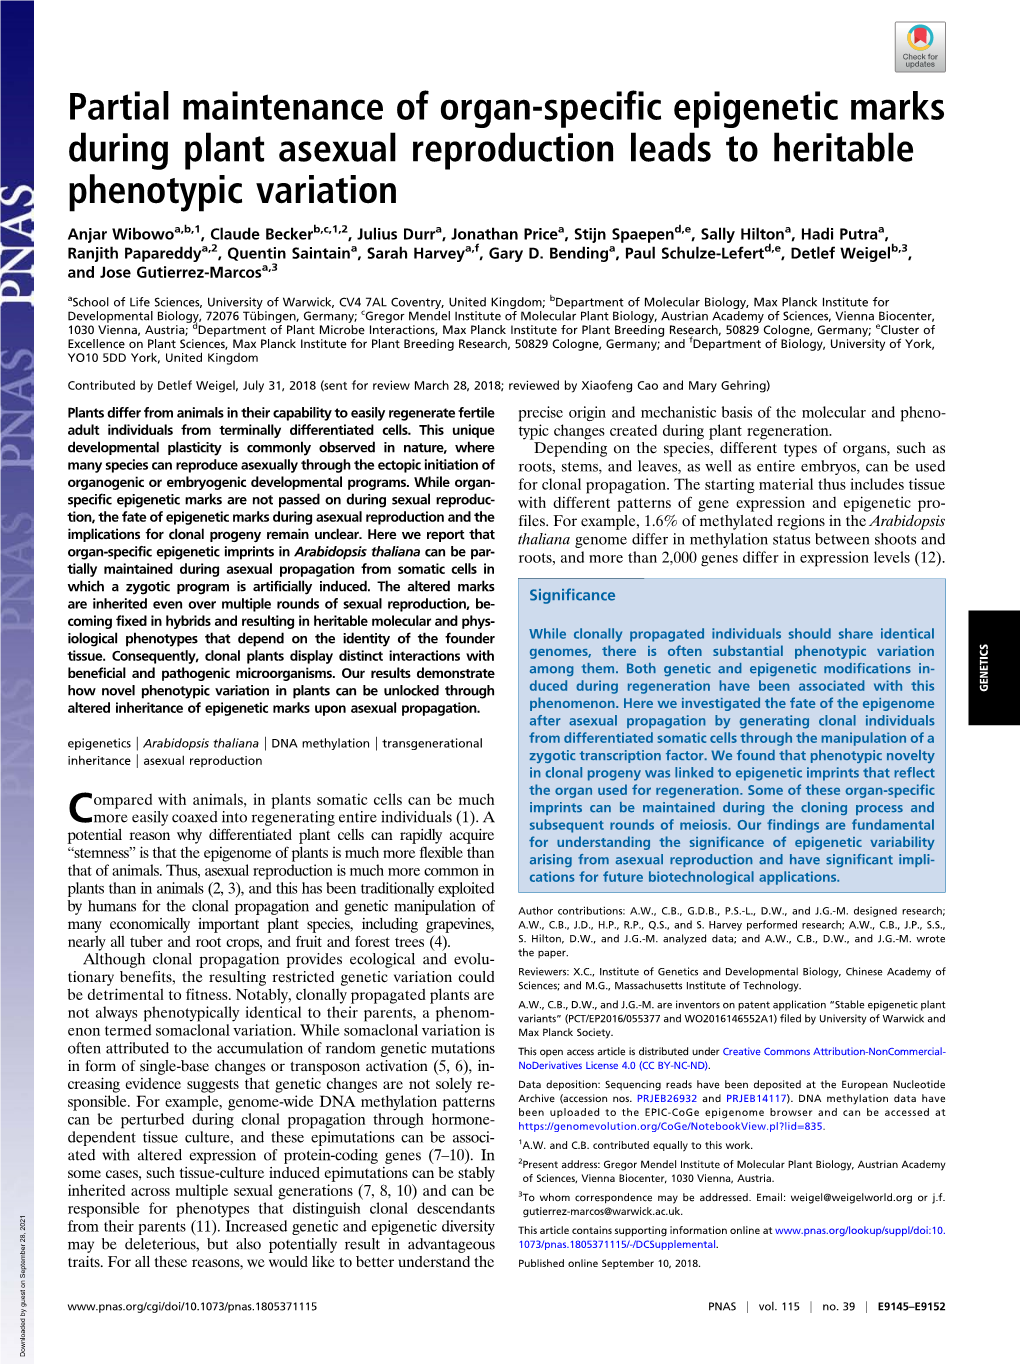 Partial Maintenance of Organ-Specific Epigenetic Marks During Plant Asexual Reproduction Leads to Heritable Phenotypic Variation